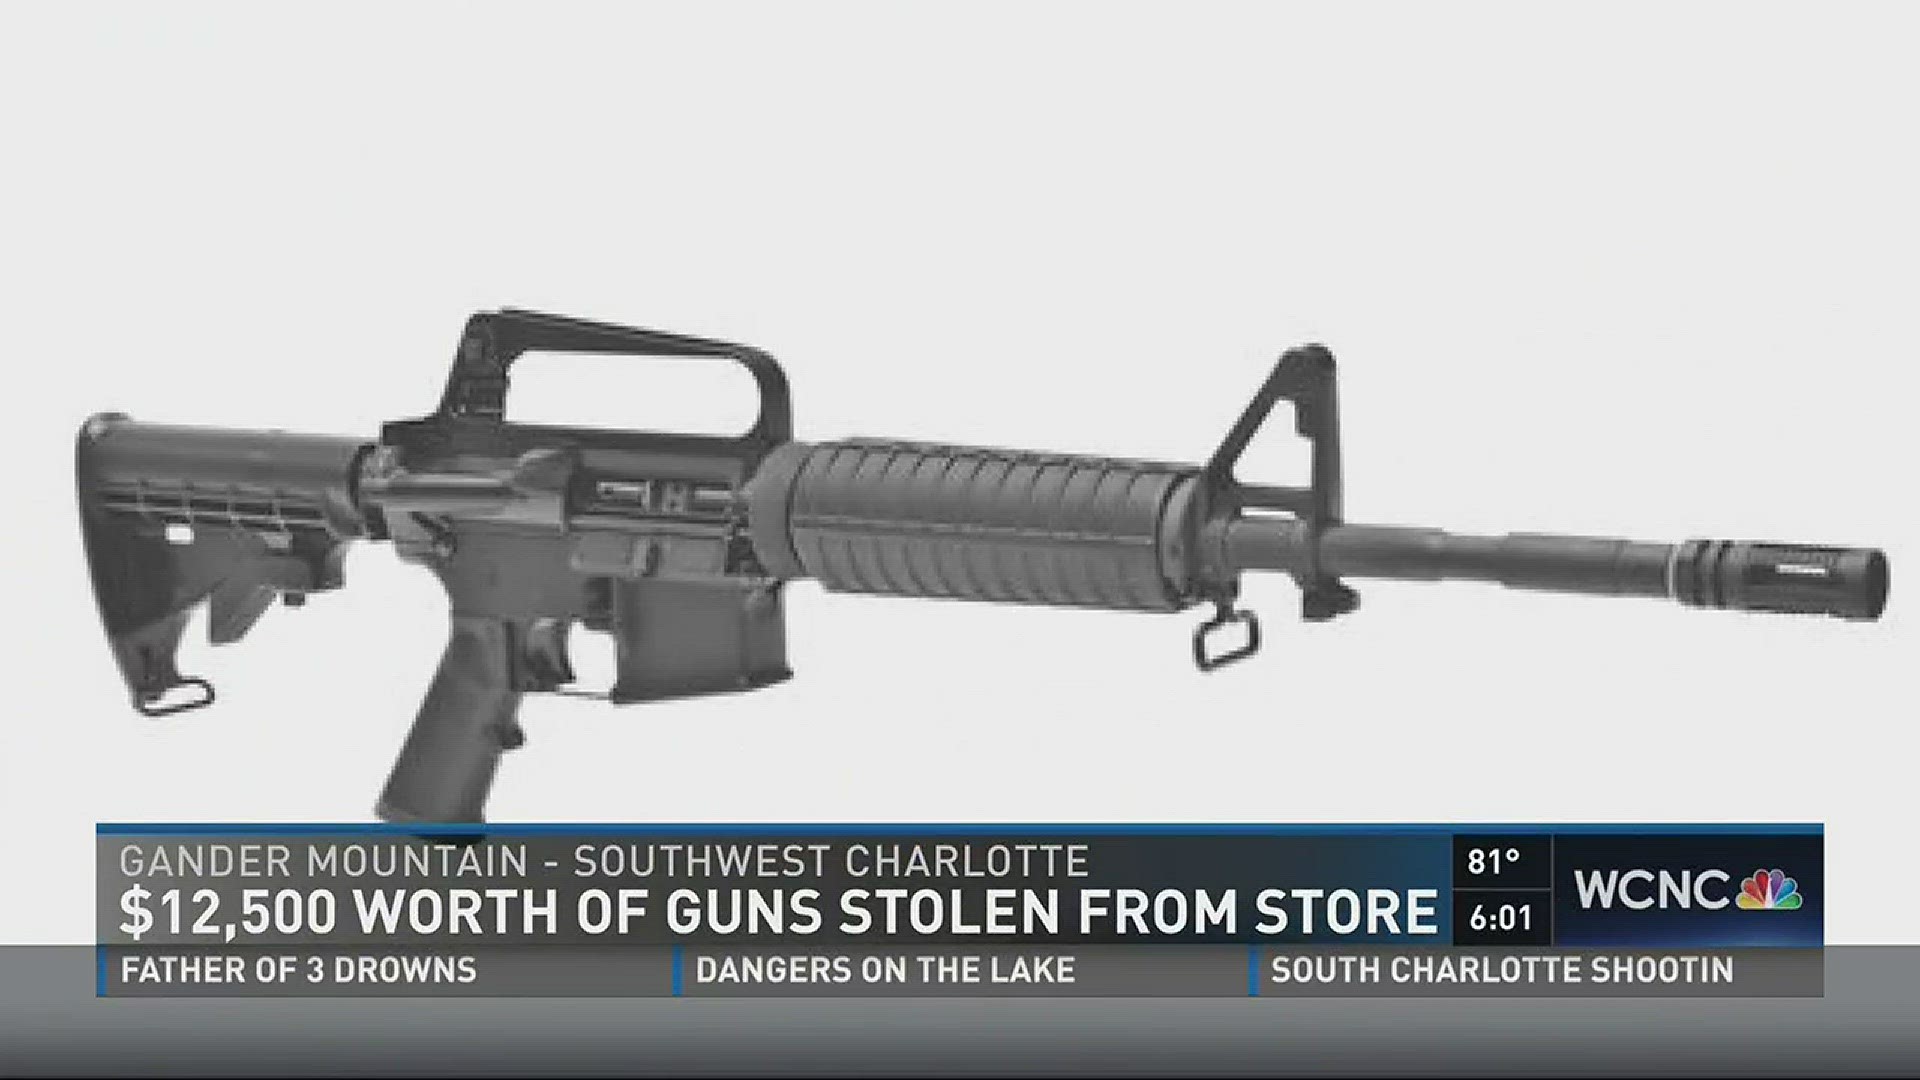 Over $12,000 worth of guns were stolen from a sporting goods store in Charlotte.